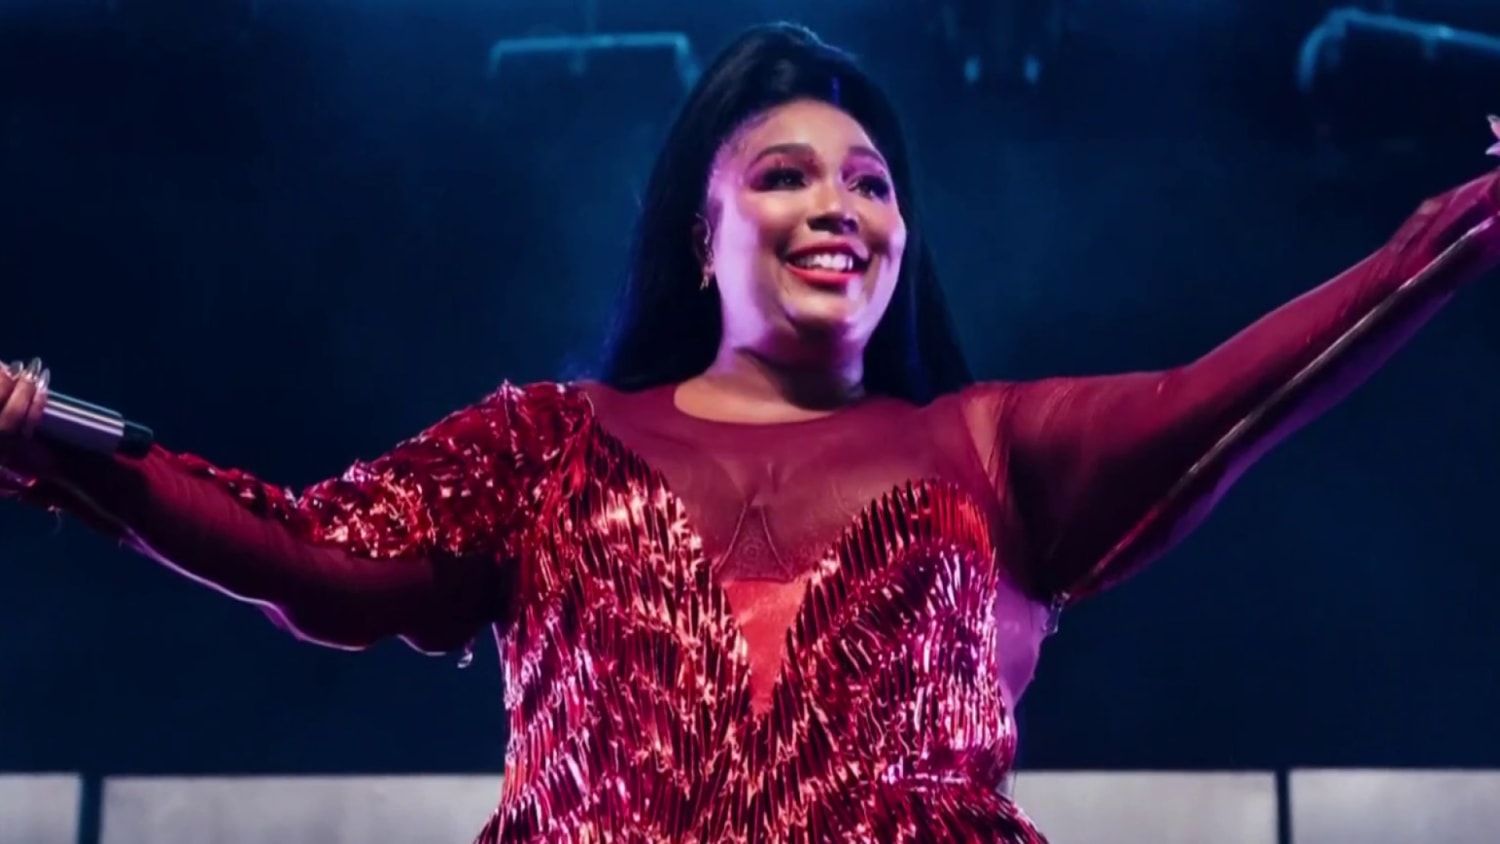 Did Lizzo fat shame her own dancers? And have the bombshell allegations  made against the proud to be plus-size rap star in an LA court prompted her  idol Beyonce to deliver a